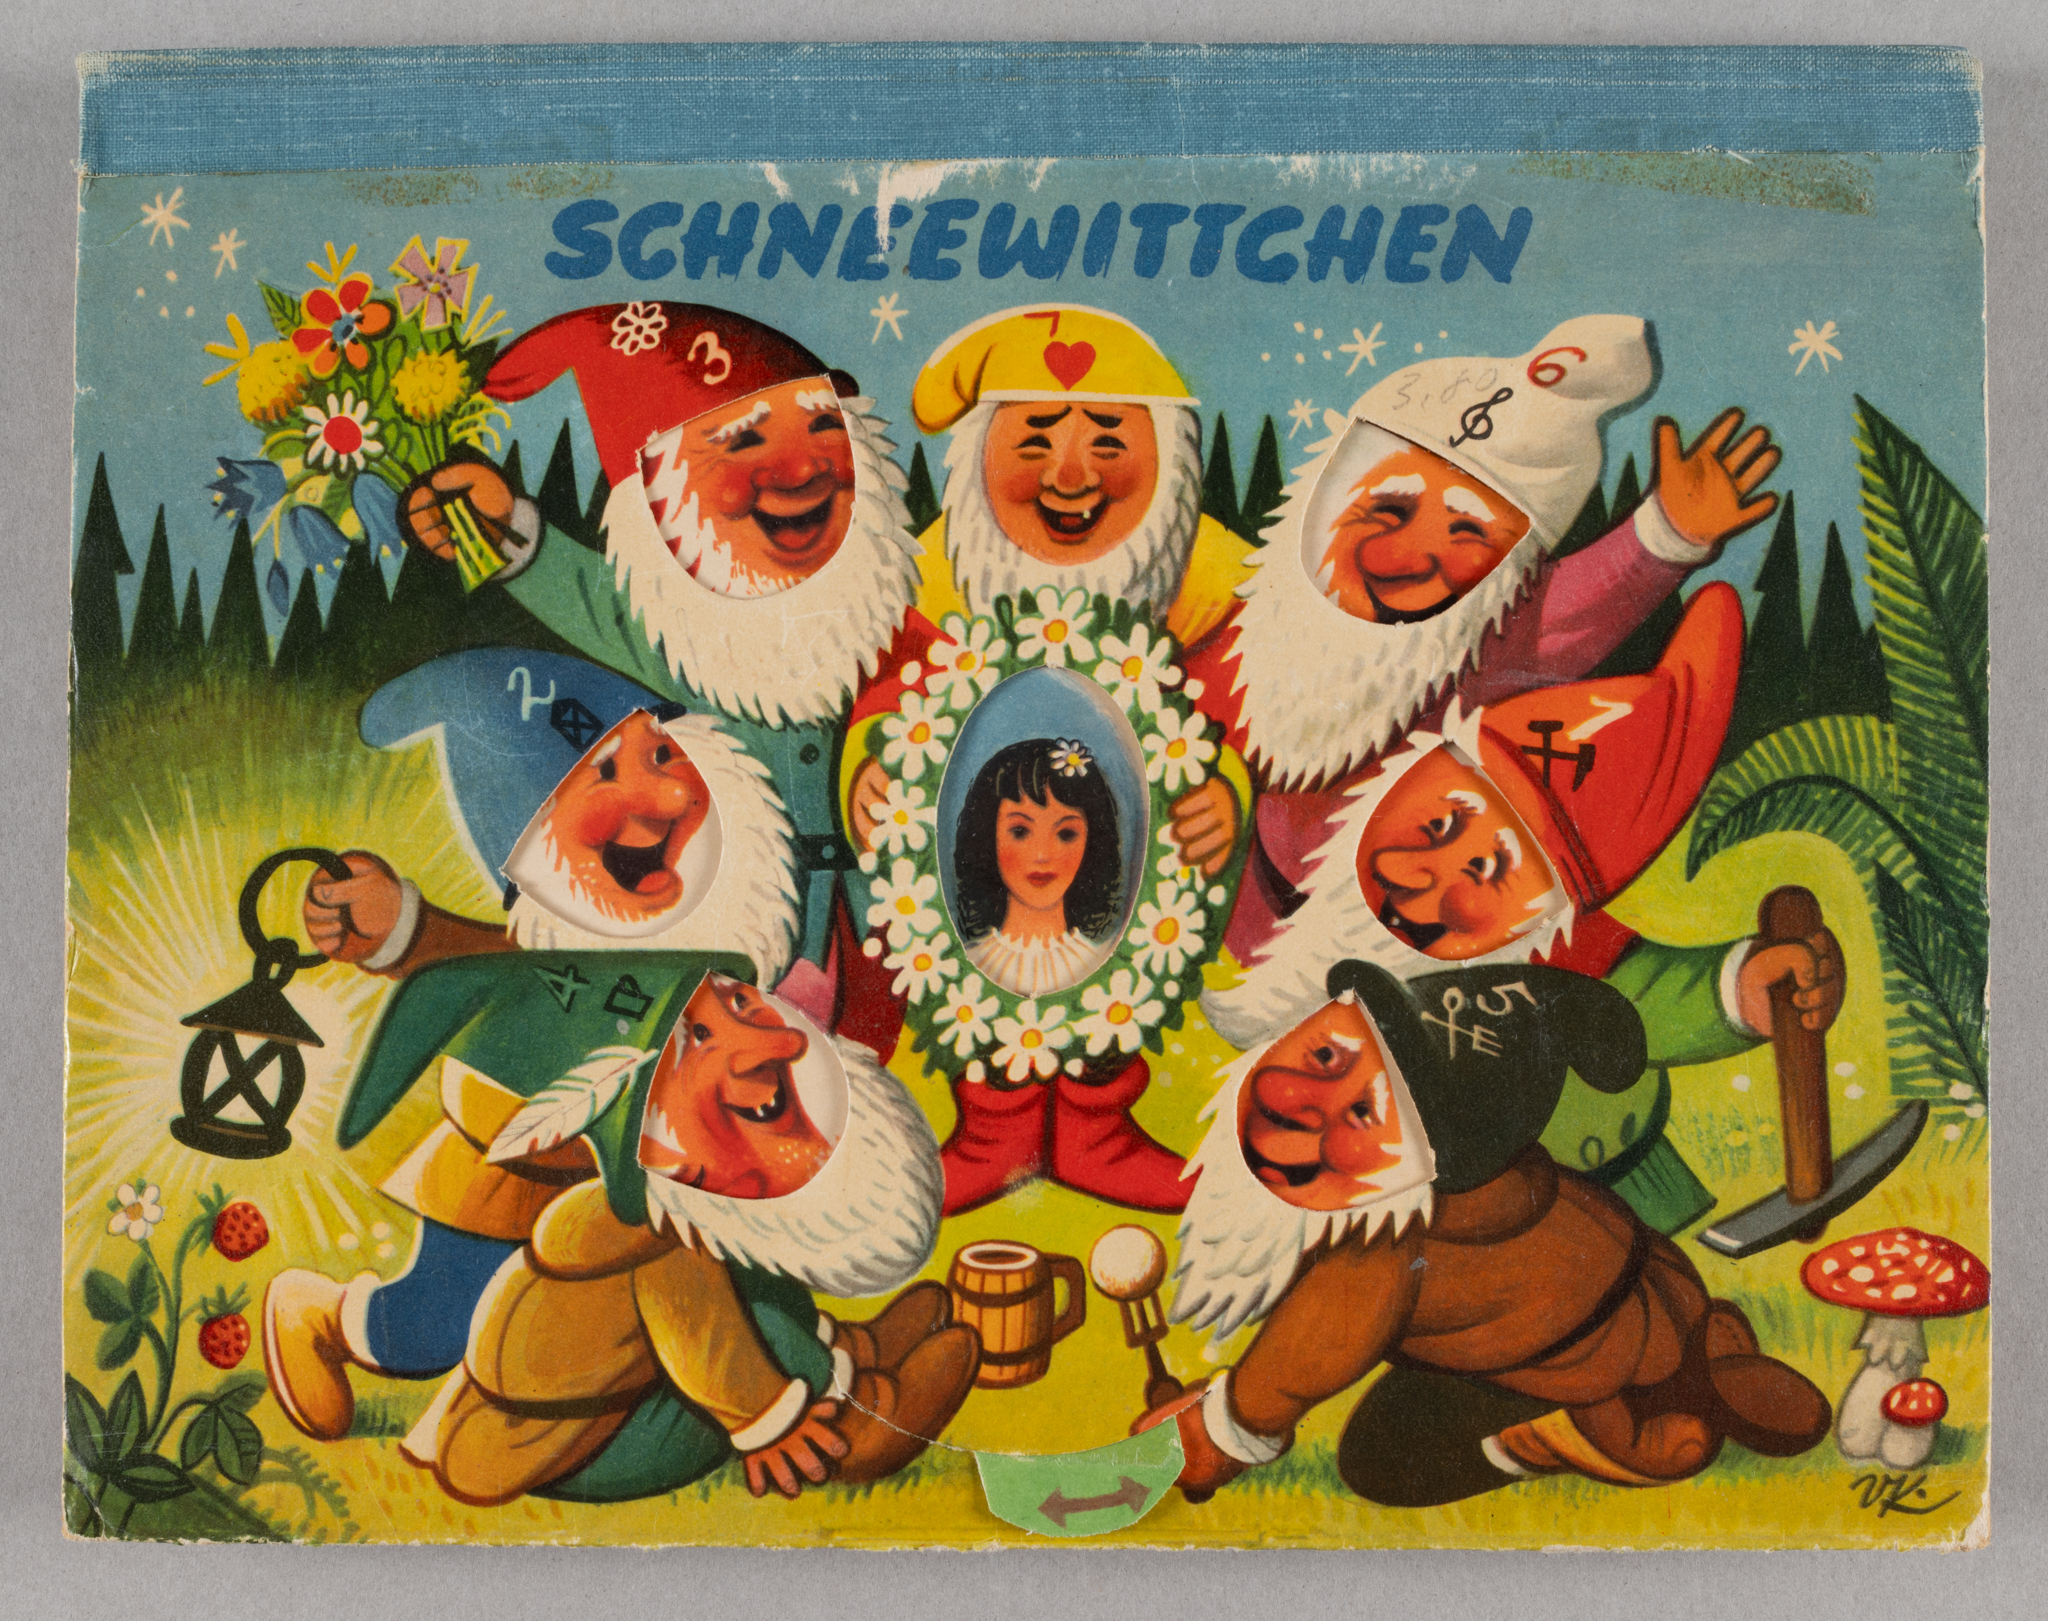 restored cover of a pop up book with image of seven dwarves in peaked, numbered caps circling a wreath of flowers in which an image of a girl appears when the pop up mechanism is manipulated